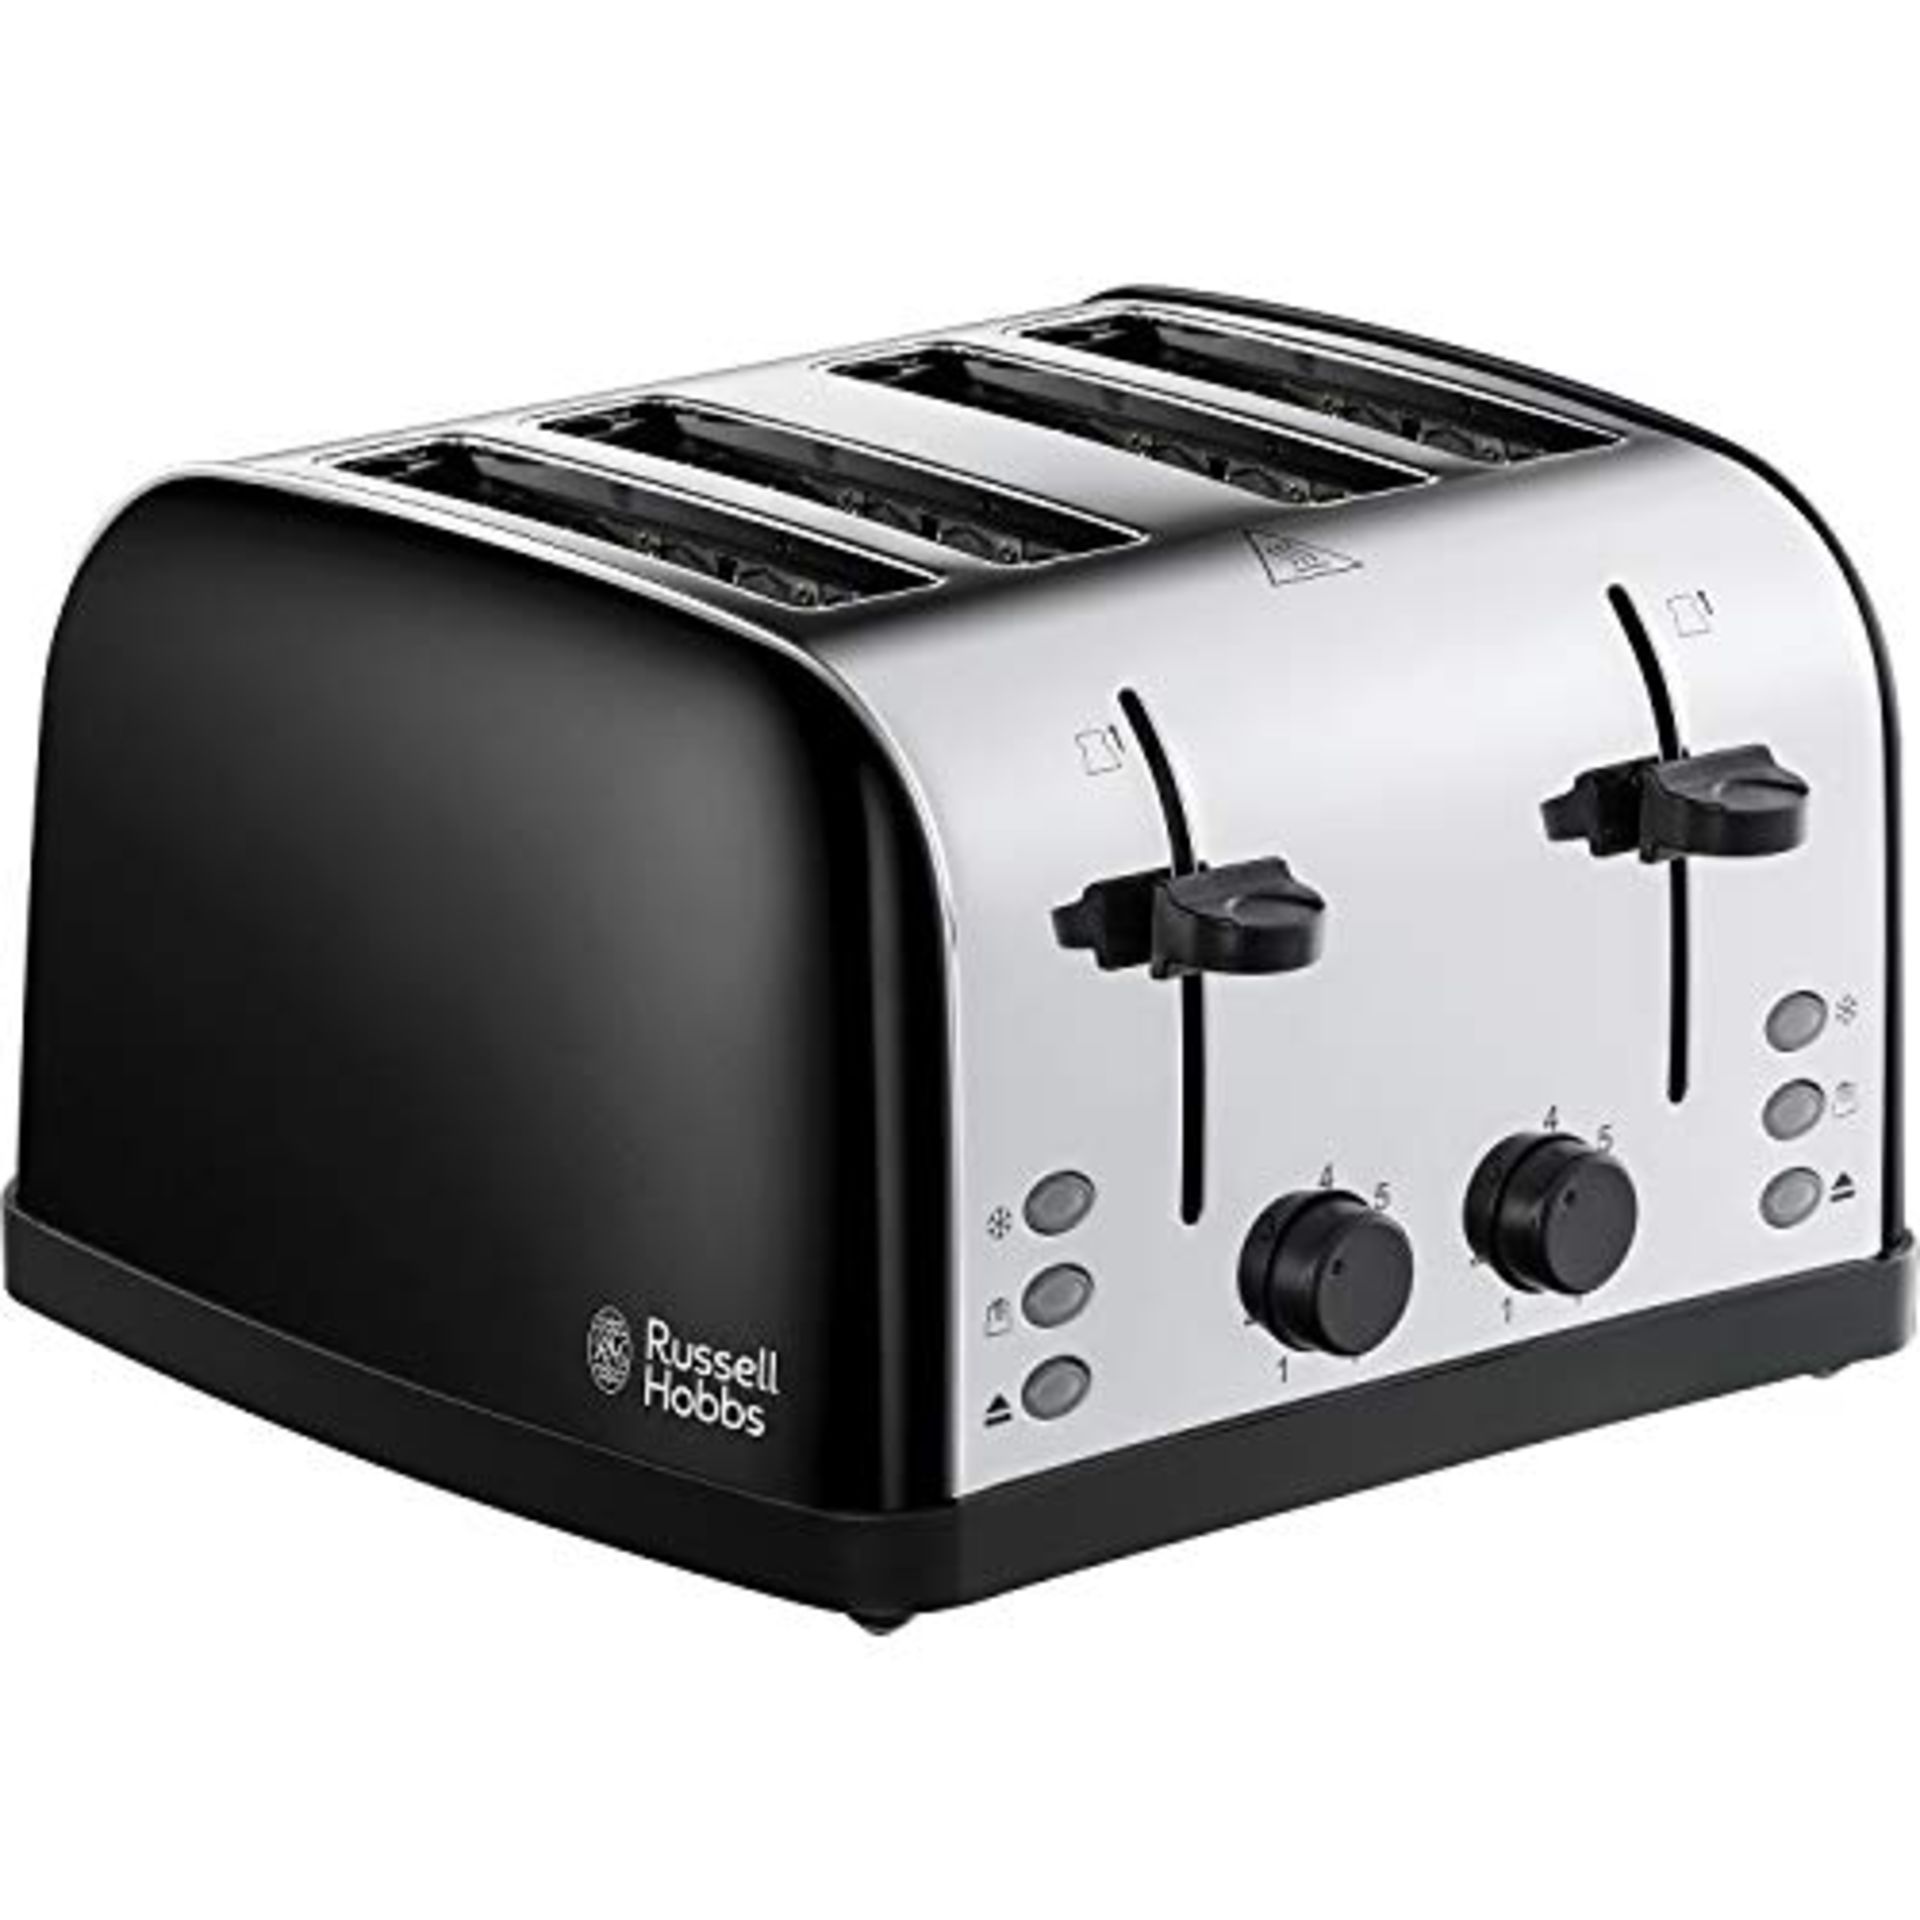 Russell Hobbs 28360 Stainless Steel Toaster, 4 Slice with Variable Browning Settings a